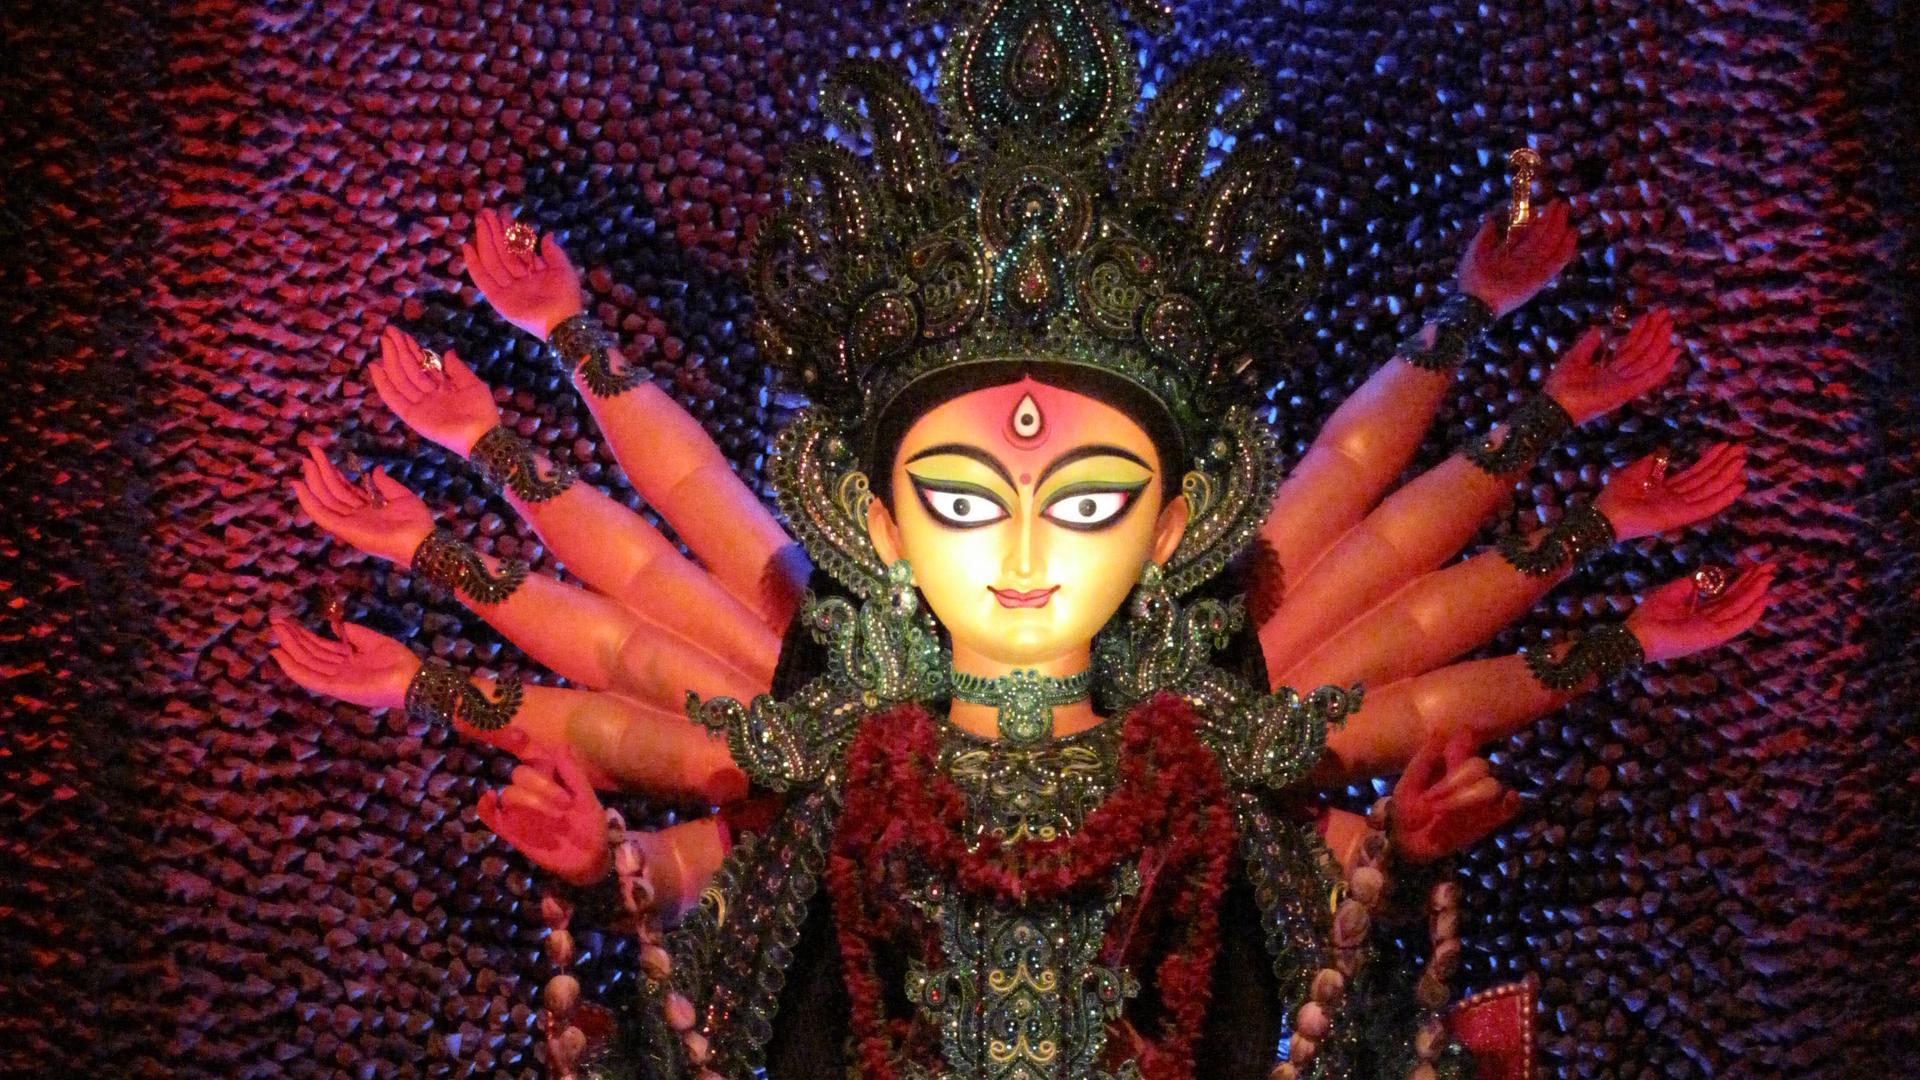 Each neighborhood in Kolkata has its own celebration with a different artist creating the idol of Durga, showing her killing the demon.